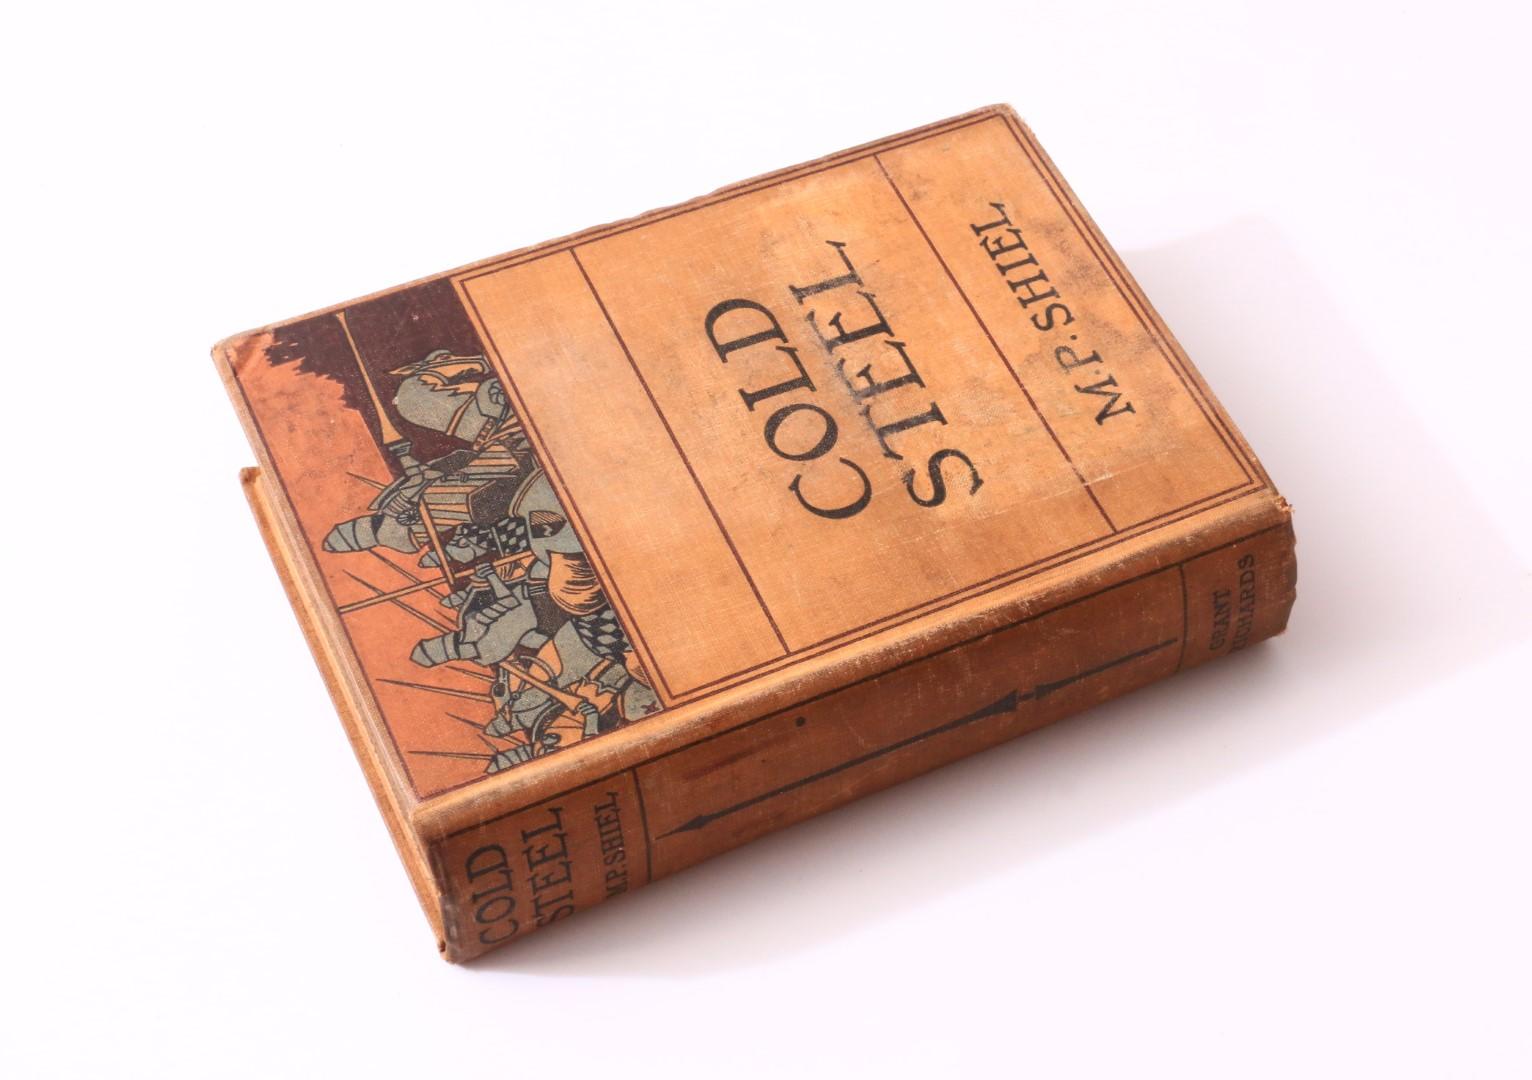 M.P. Shiel - Cold Steel - Grant Richards, 1899, First Edition.